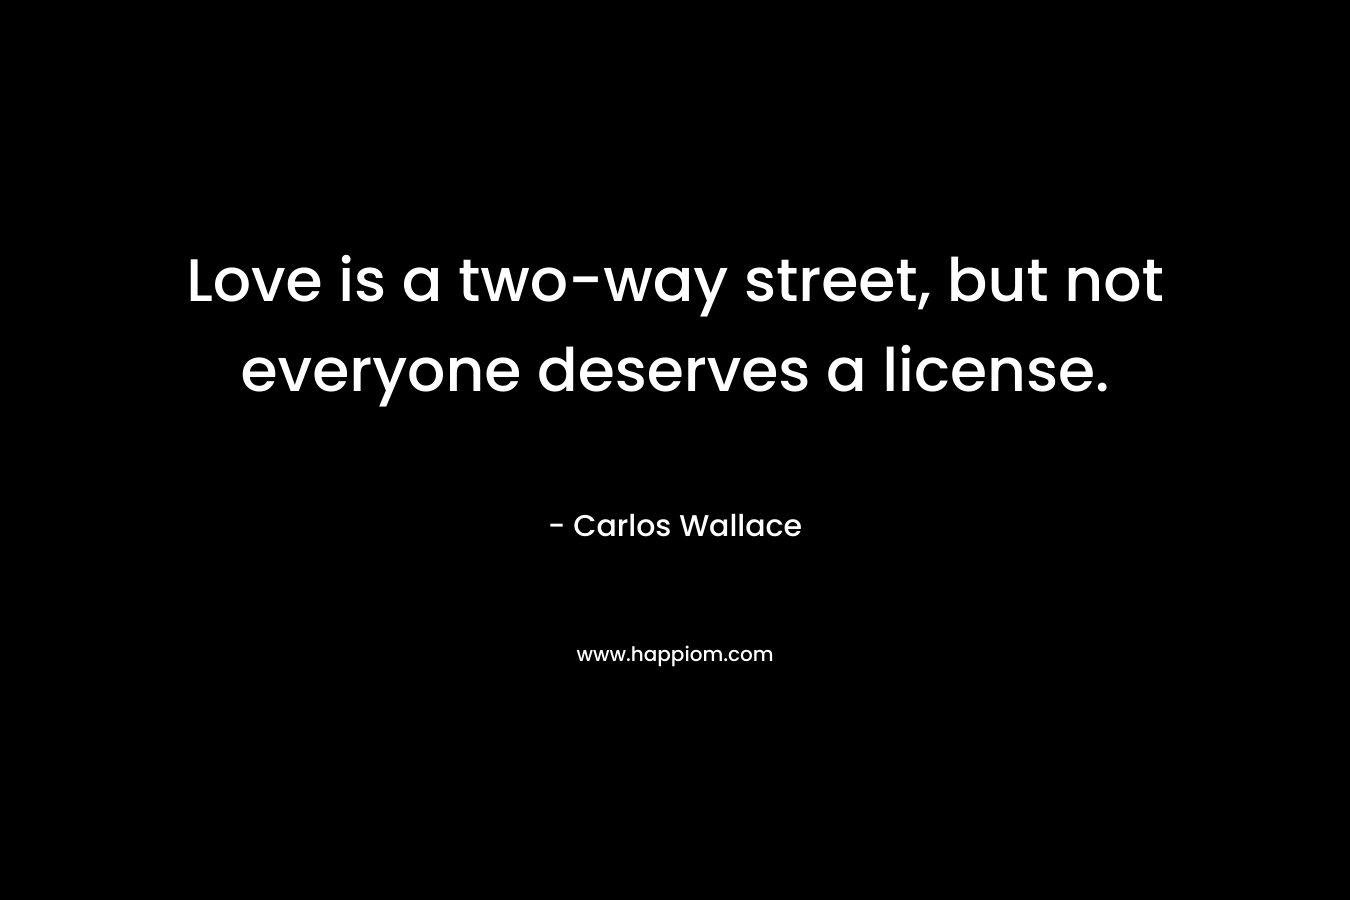 Love is a two-way street, but not everyone deserves a license.